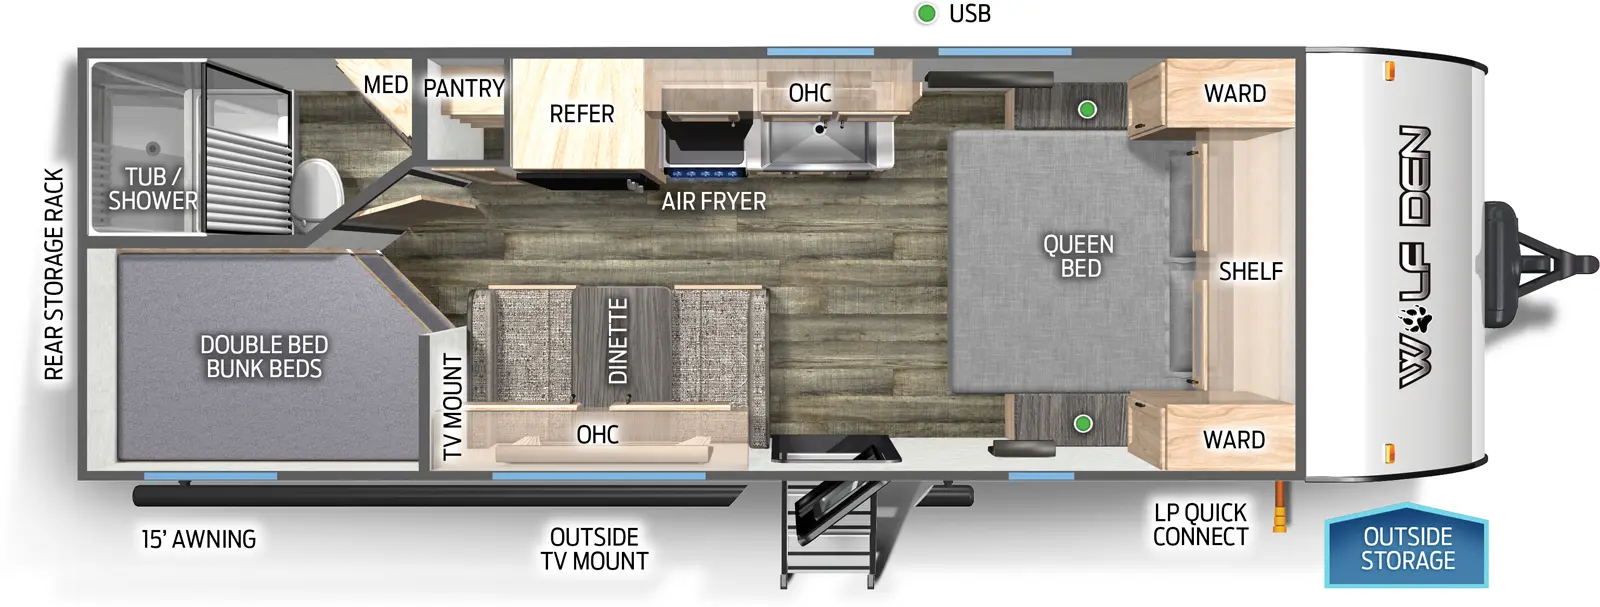 The 22MKSE has no slide outs and one entry door. Exterior features outside storage, LP quick connect, outside TV mount, 15 foot awning, and rear storage rack. Interior layout front to back: foot-facing queen bed, shelf above, and wardrobes on either side; off-door side kitchen countertop with sink, overhead cabinet, air fryer, refrigerator, and pantry; door side entry, dinette with overhead cabinet, and TV mount; rear door side double bed bunk beds; rear off-door side full bathroom with medicine cabinet.